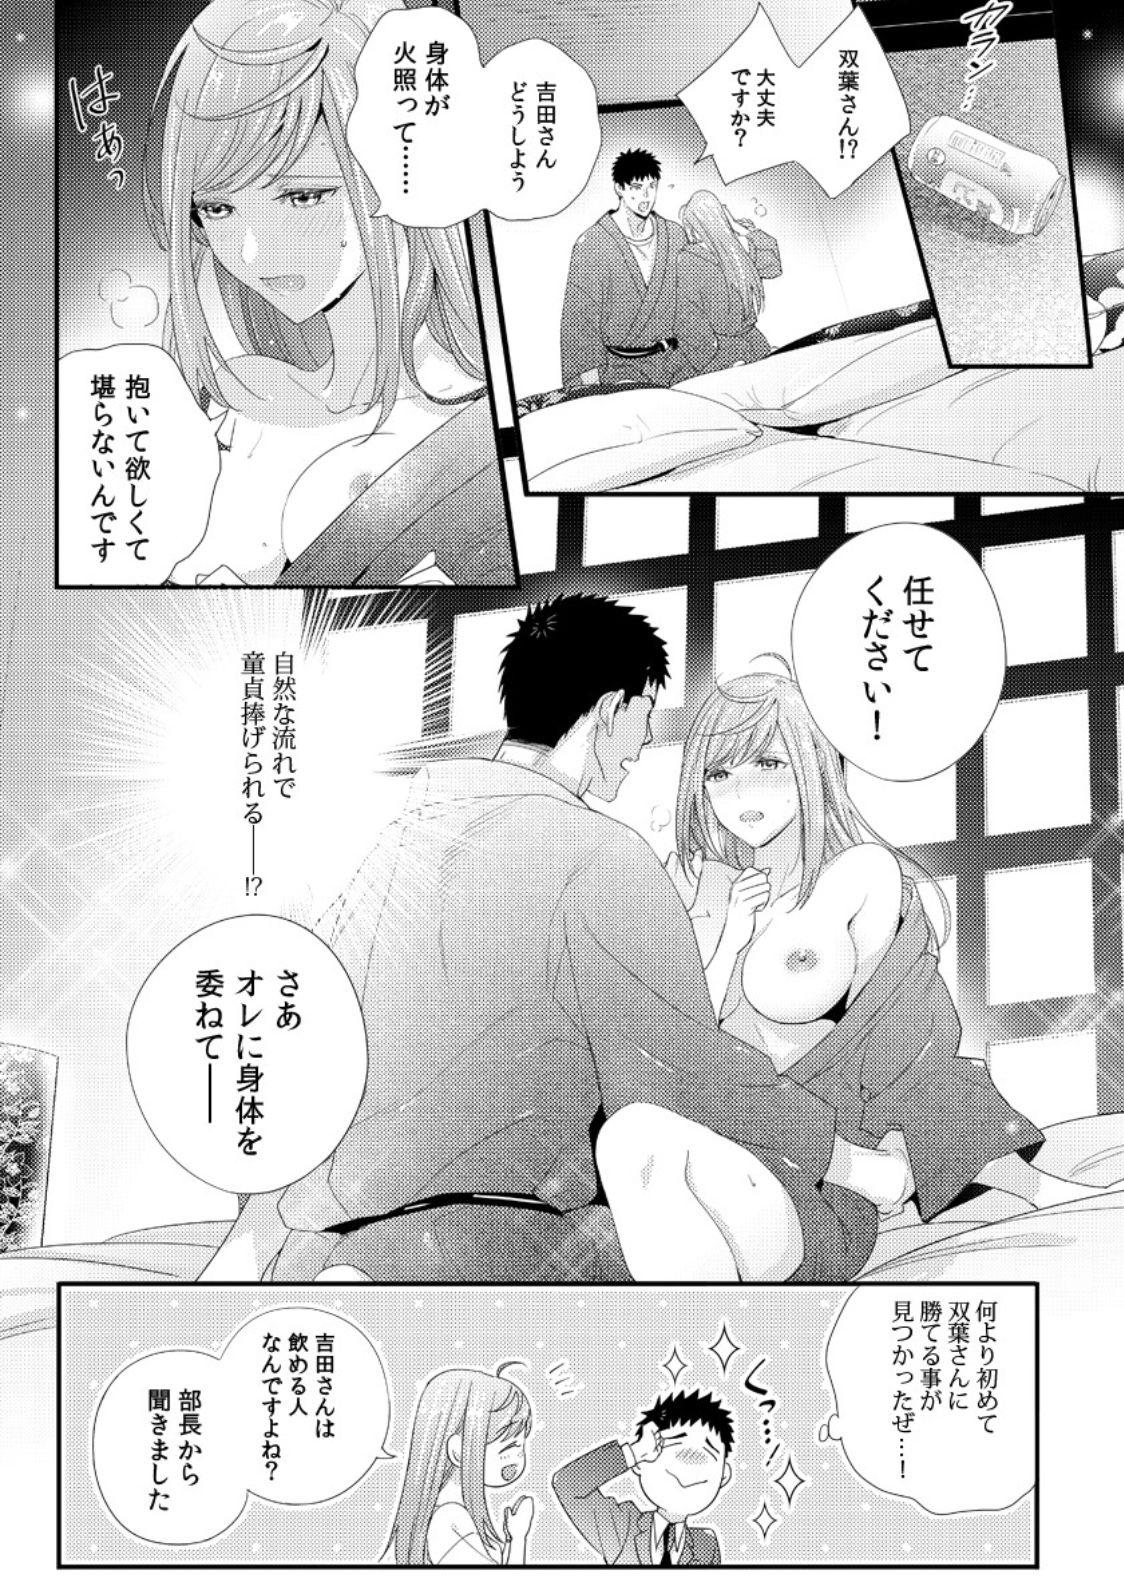 Please Let Me Hold You Futaba-San! Ch. 1+2 6